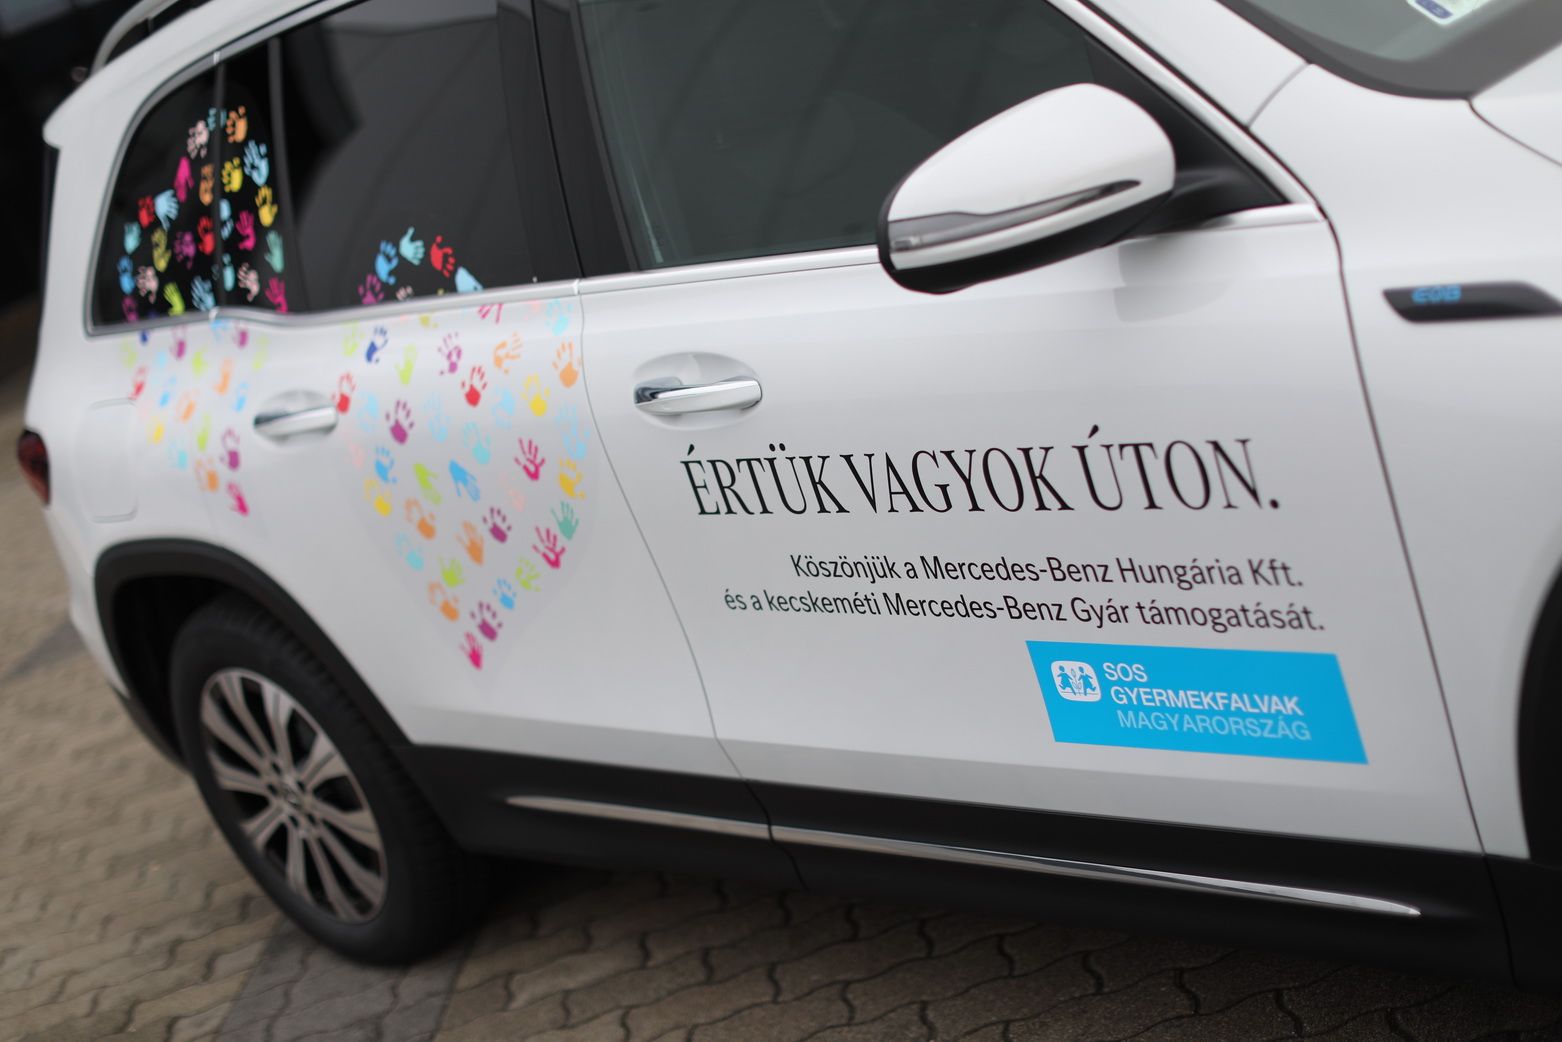 MERCEDES-BENZ SUPPORTS THE KECSKEMÉT CENTRE OF SOS CHILDREN'S VILLAGES WITH AN ELECTRIC CAR